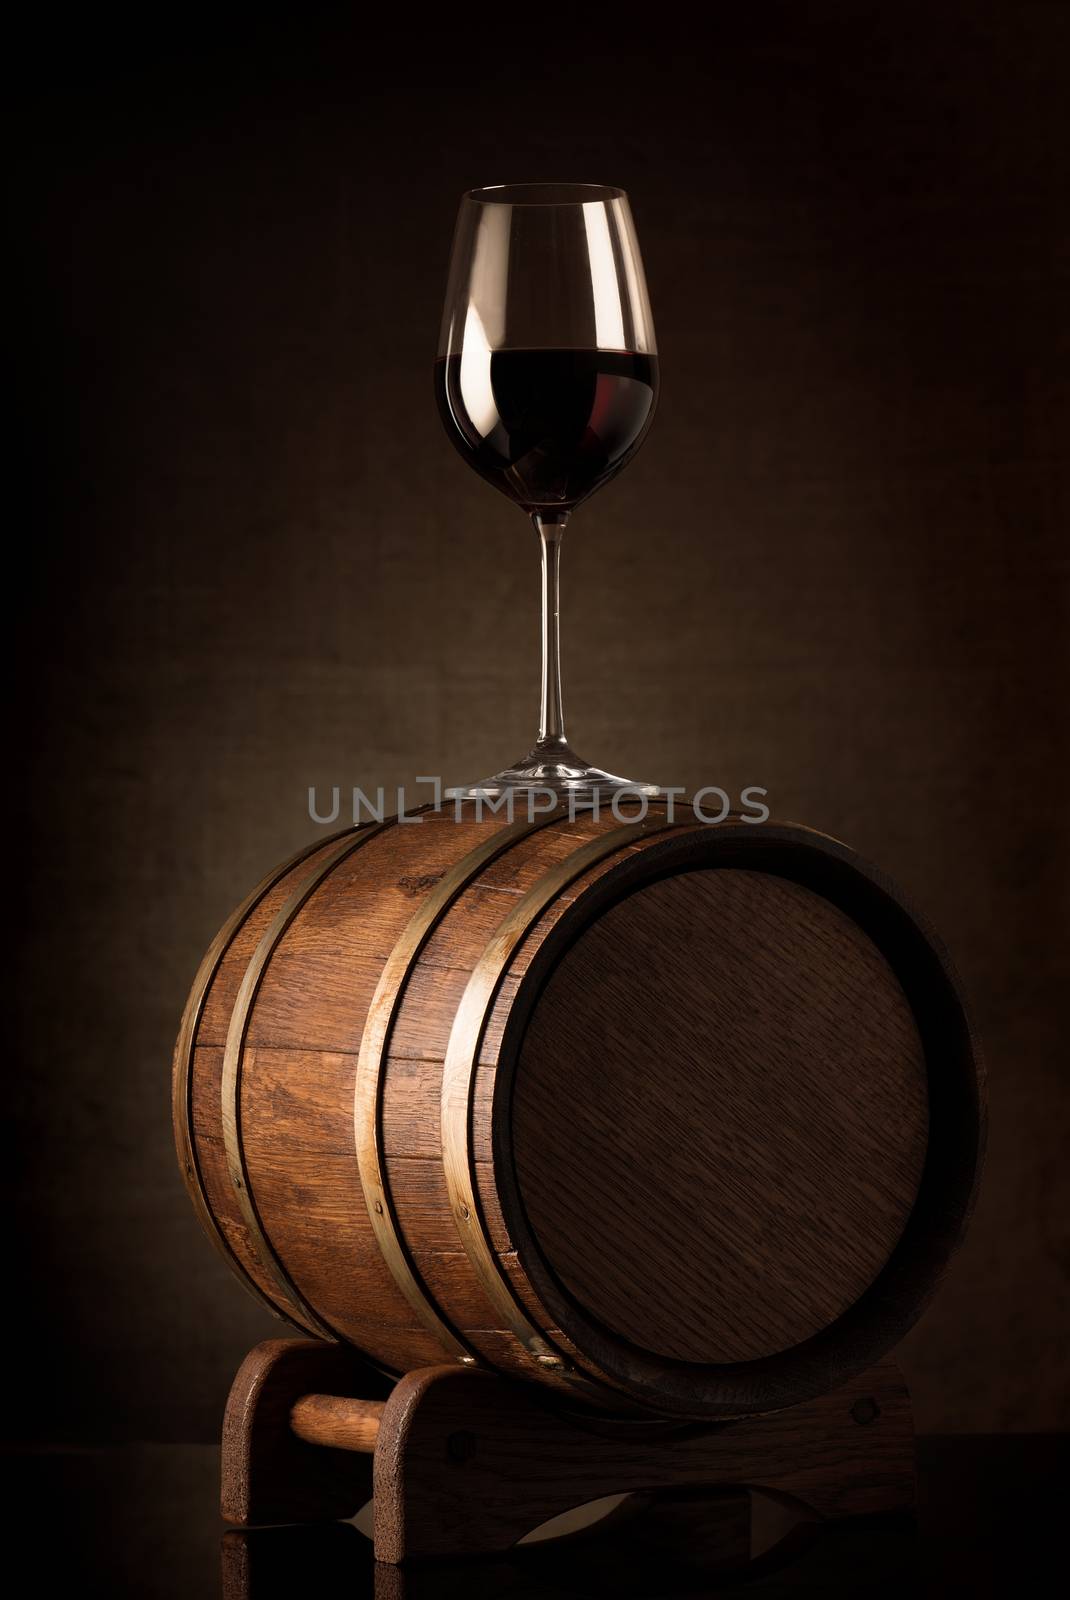 Wineglass with red wine on a wooden barrel